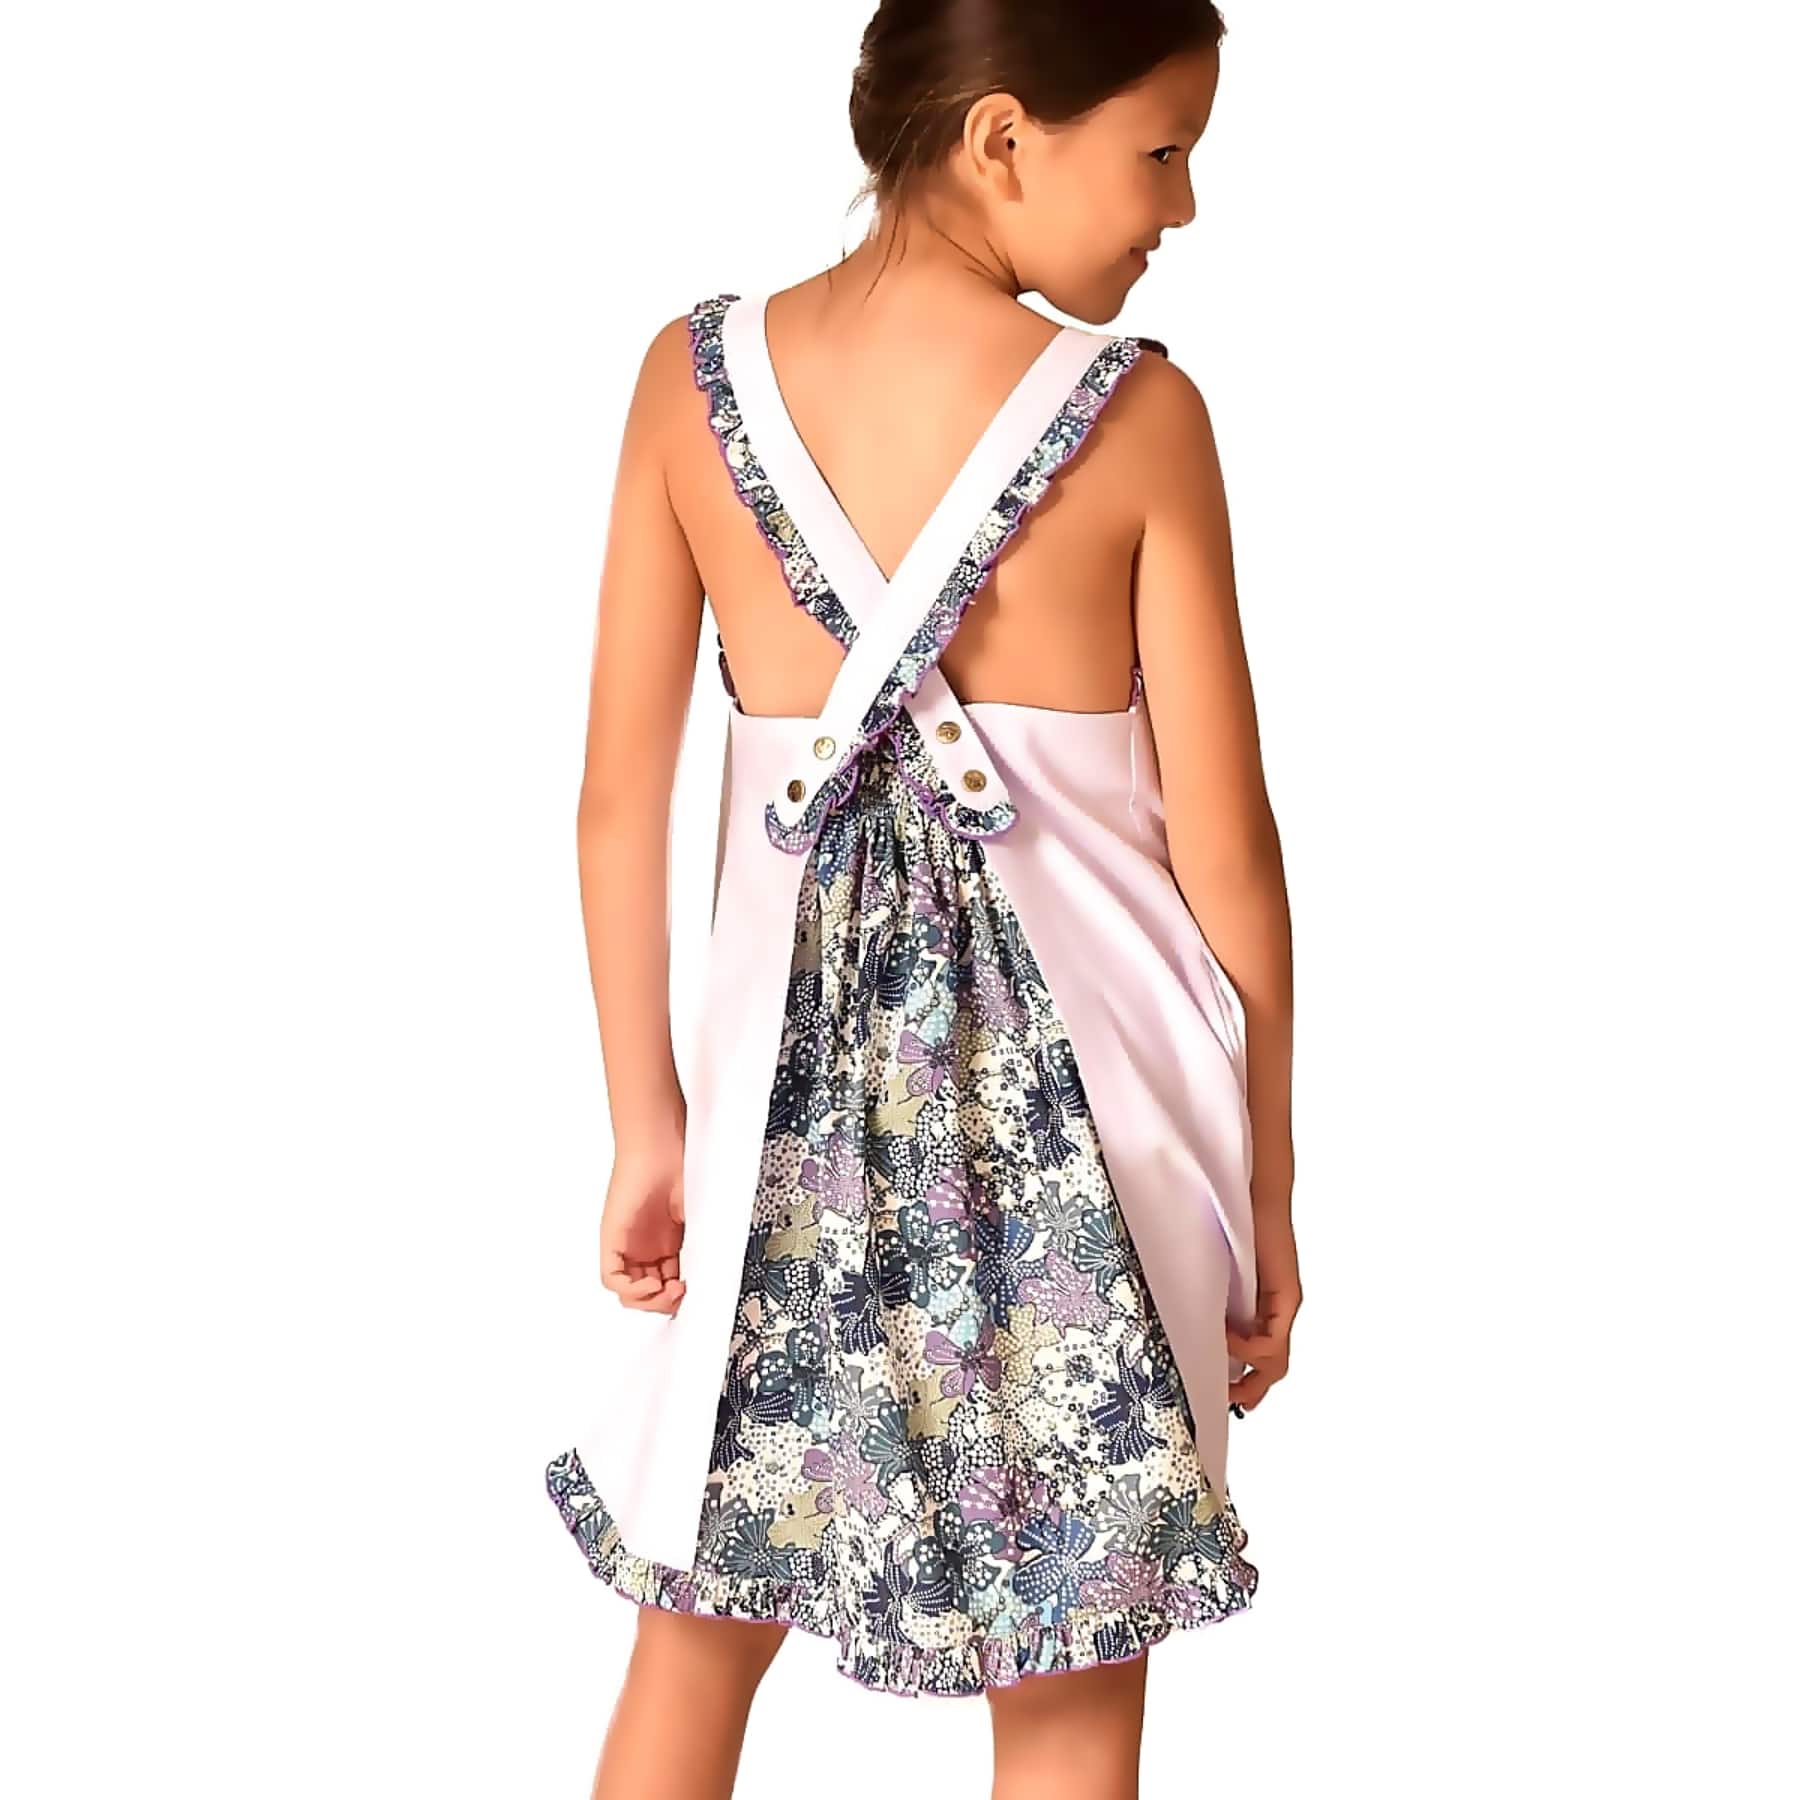 Girl's lilac summer dress with ruffled straps and contrasting back in navy, purple, lilac floral cotton. ANAIS apron dress model from the children's fashion brand LA FAUTE A VOLTAIRE